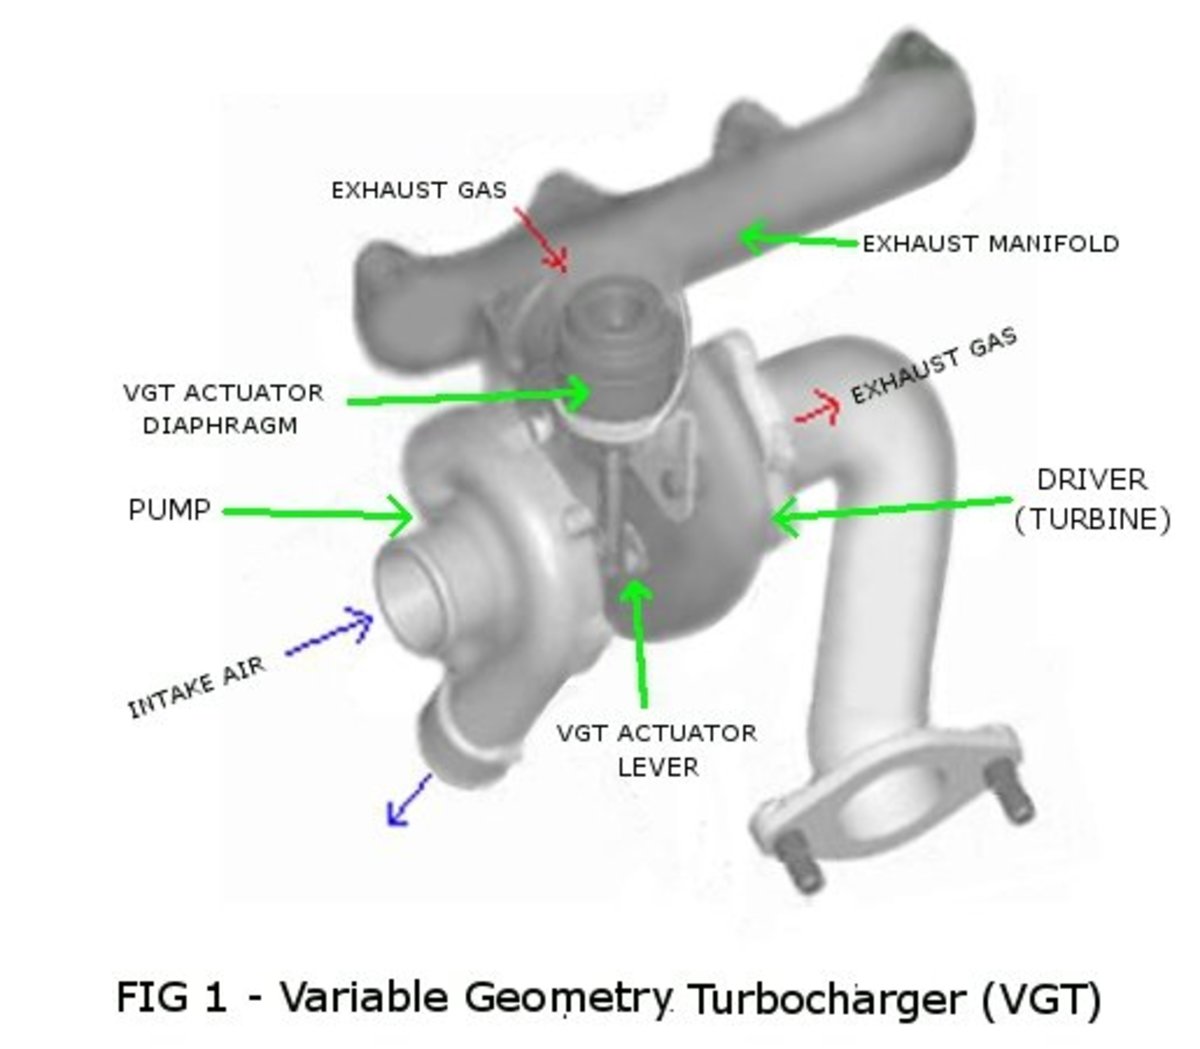 Turbocharged Diesel Engine Lacks Power Due to Stuck VGT ... labeled motorcycle diagram 